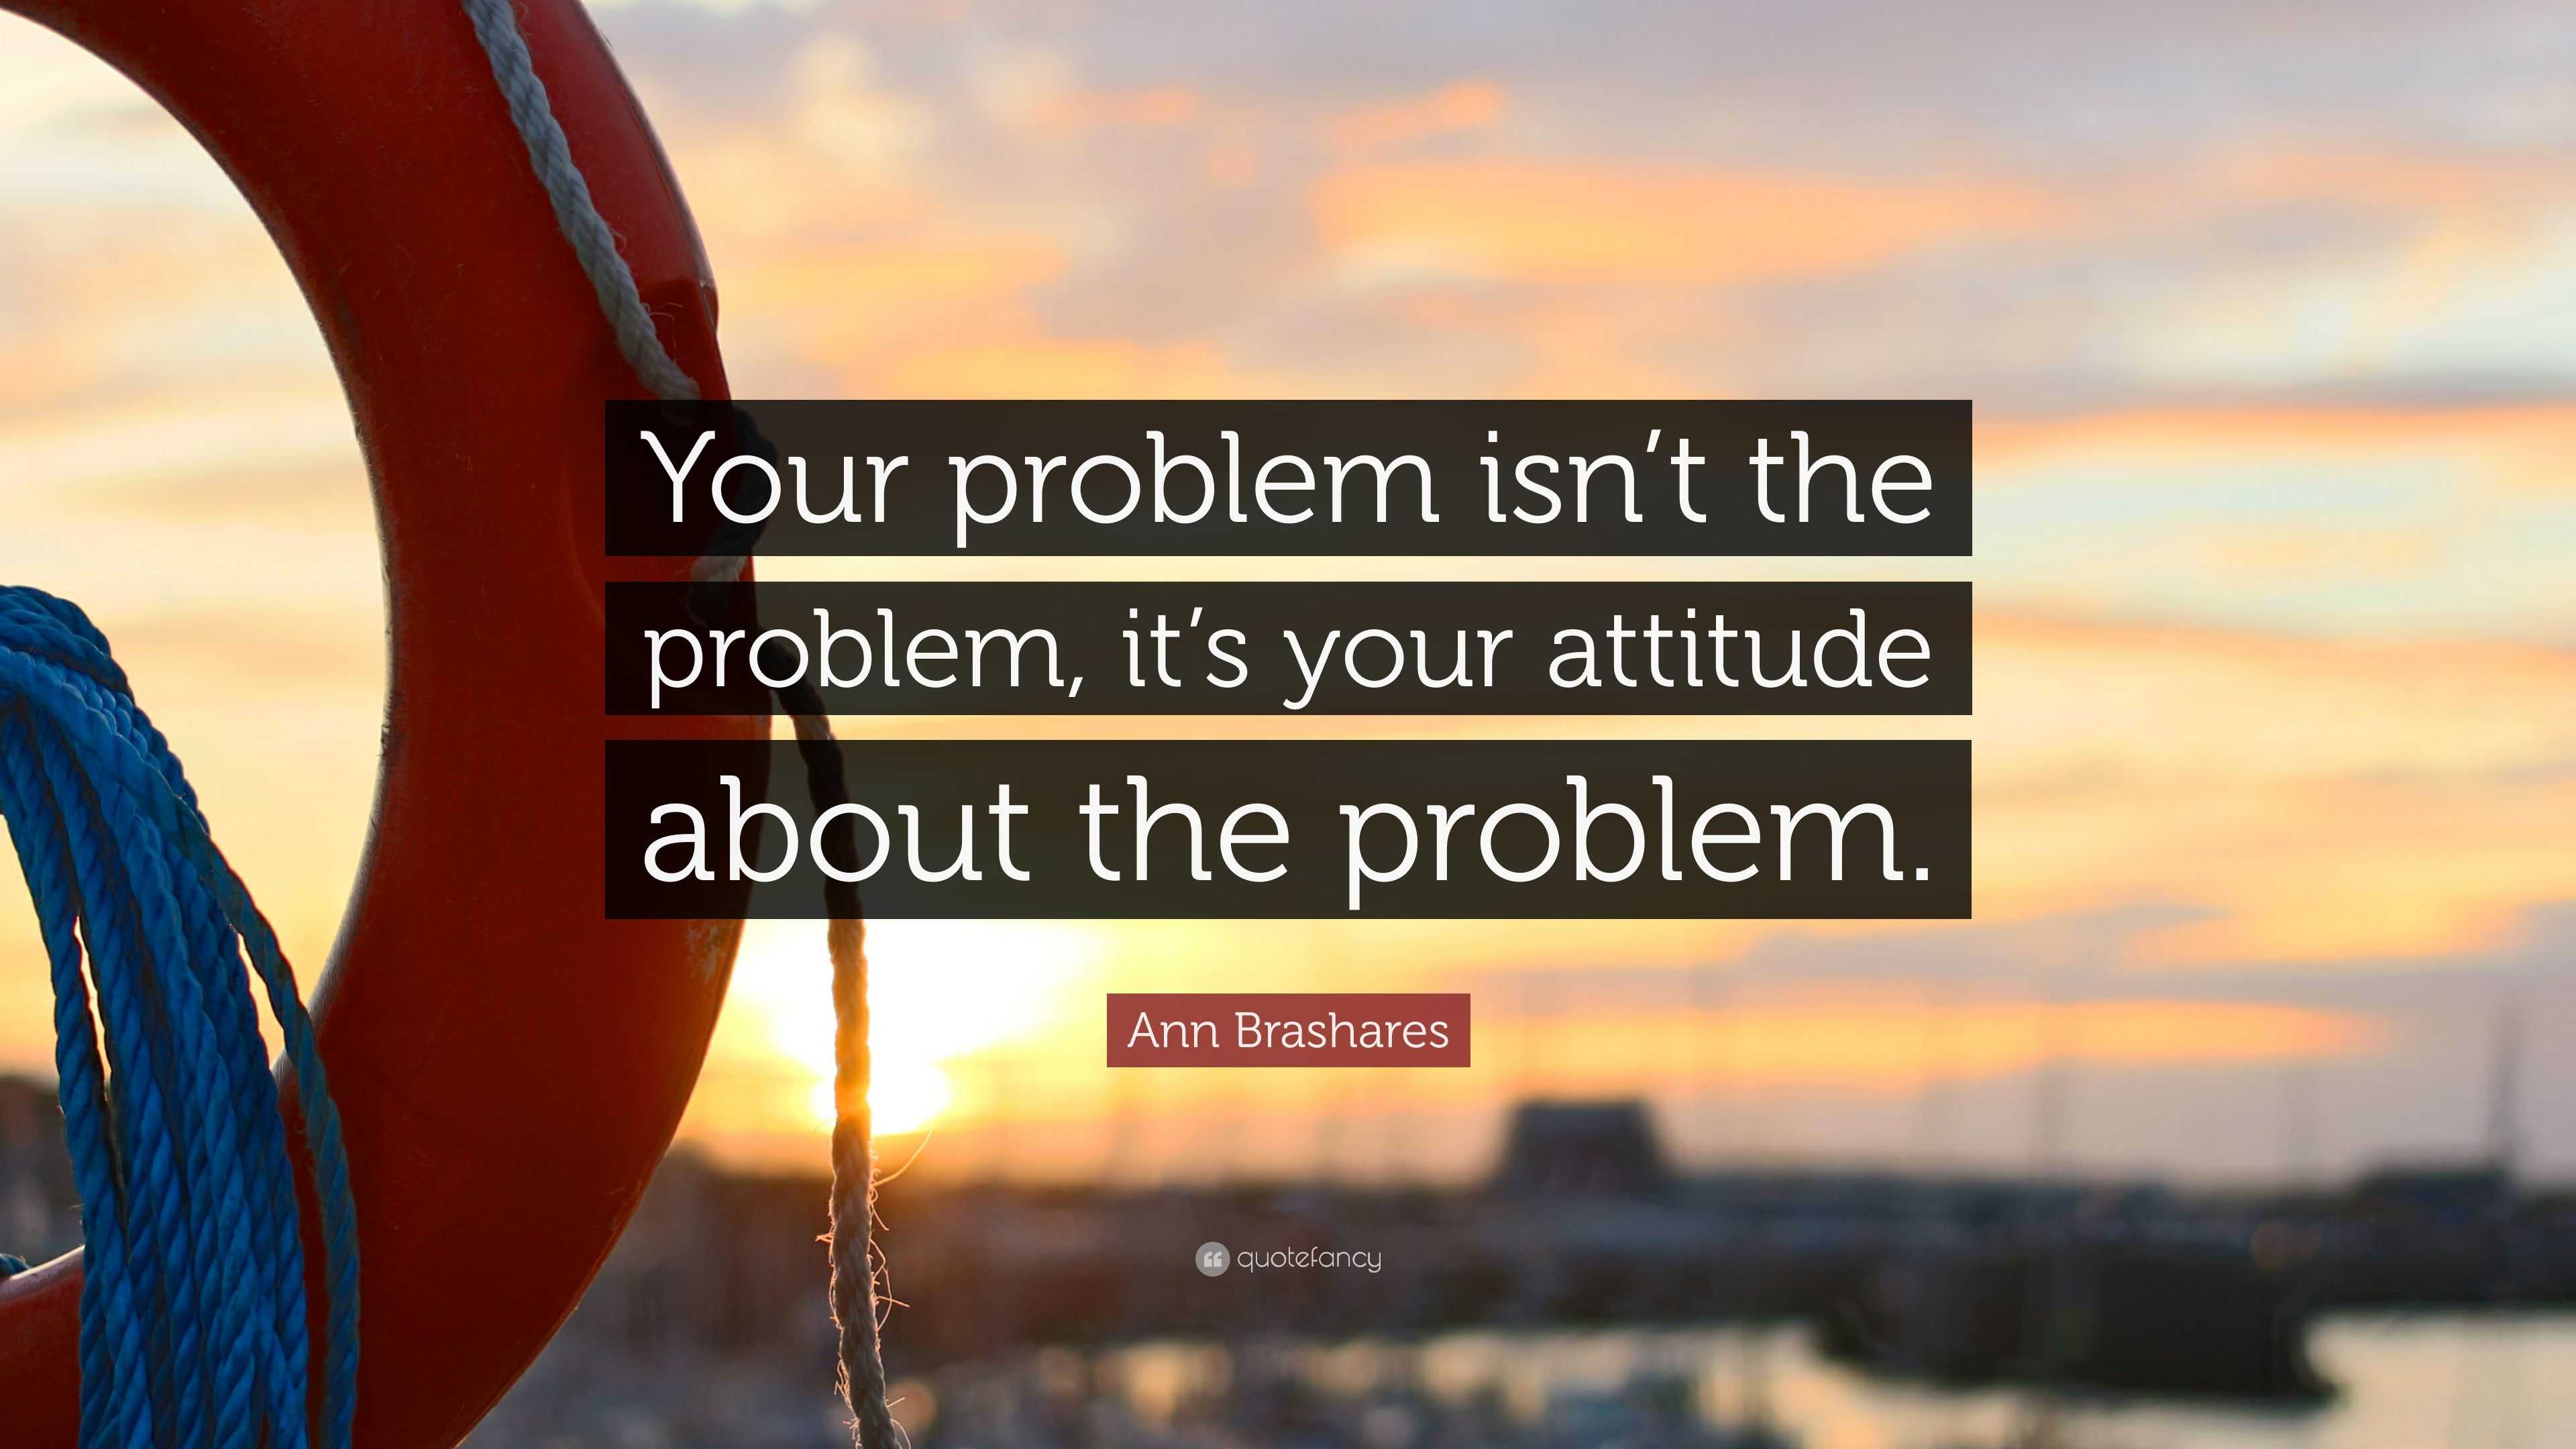 Ann Brashares Quote: “Your problem isn’t the problem, it’s your